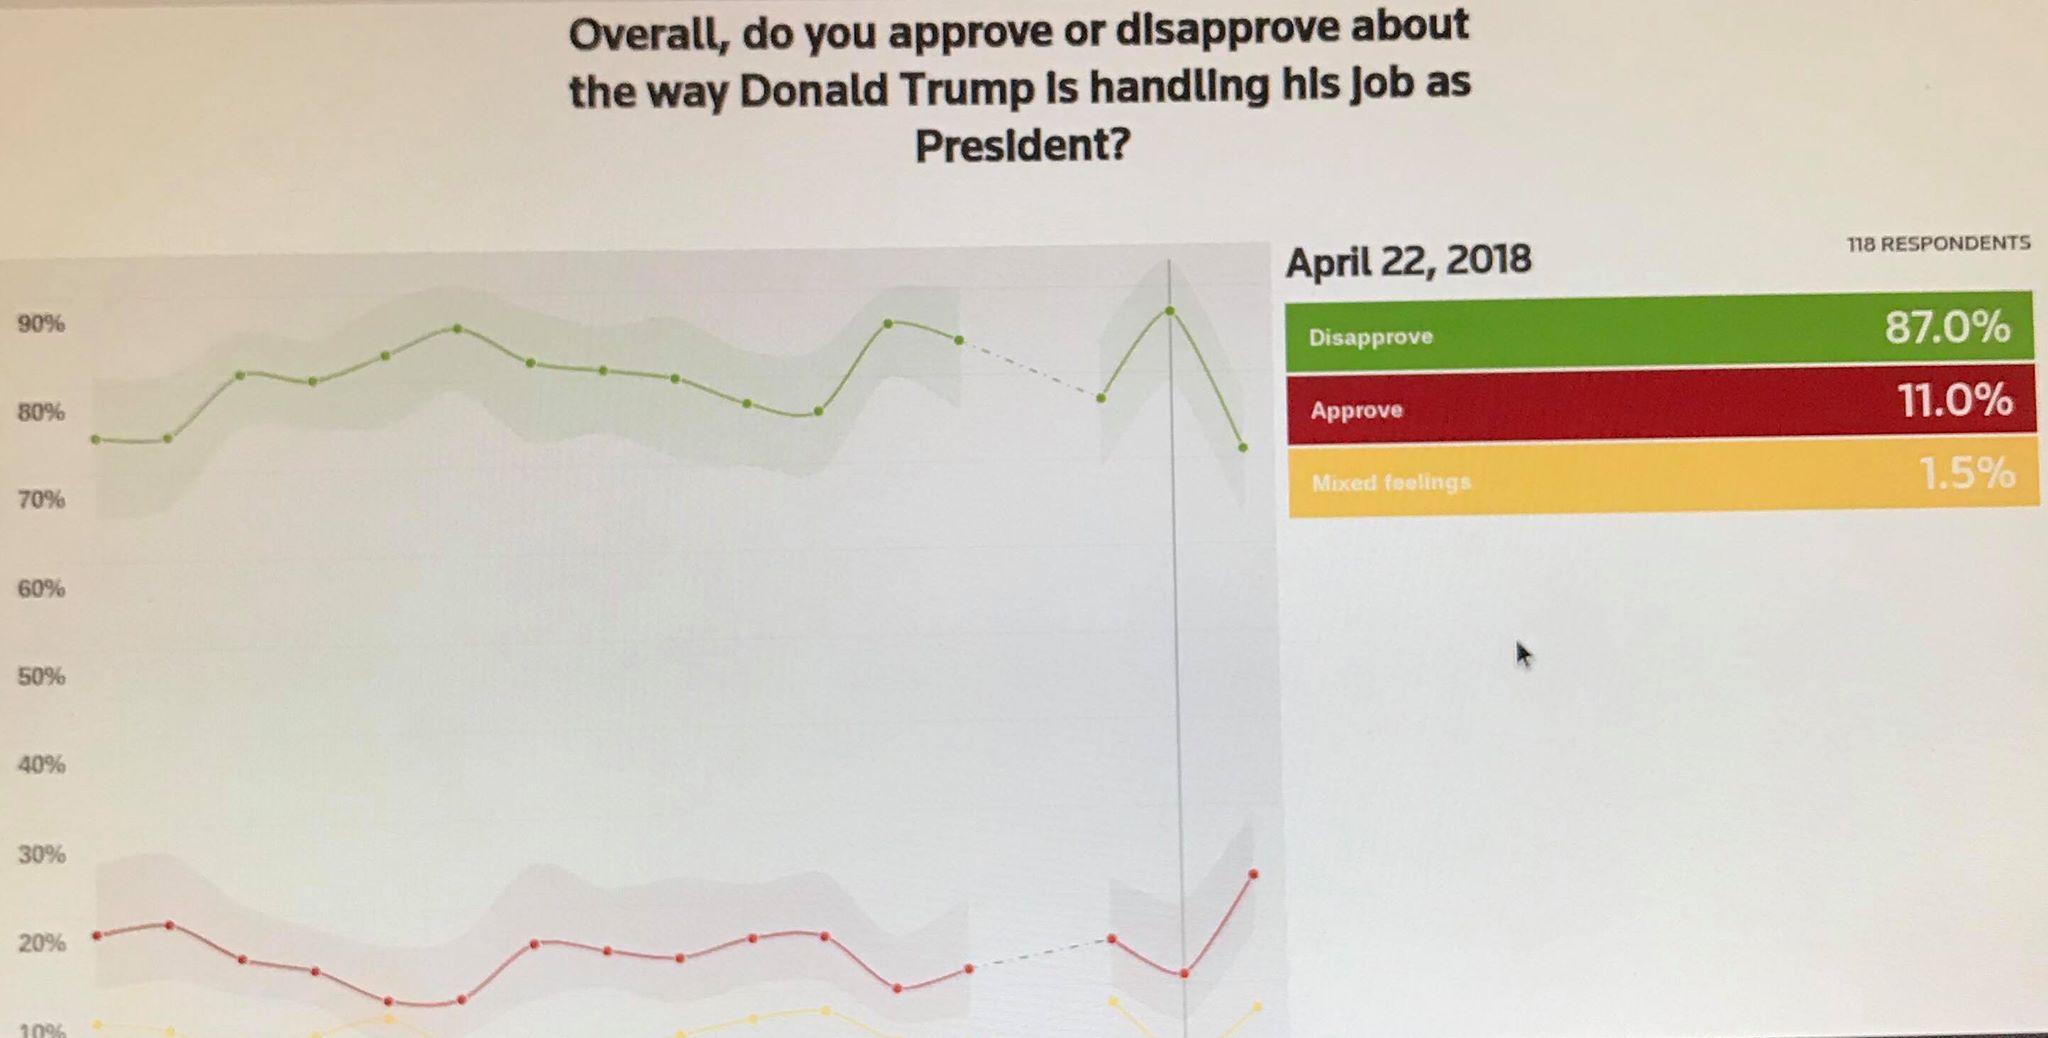 Reuters poll week ending April 22, 2018 reflects black men approval rating of the President at 11%. Photo credit to US4Trump Reuters screen capture. 